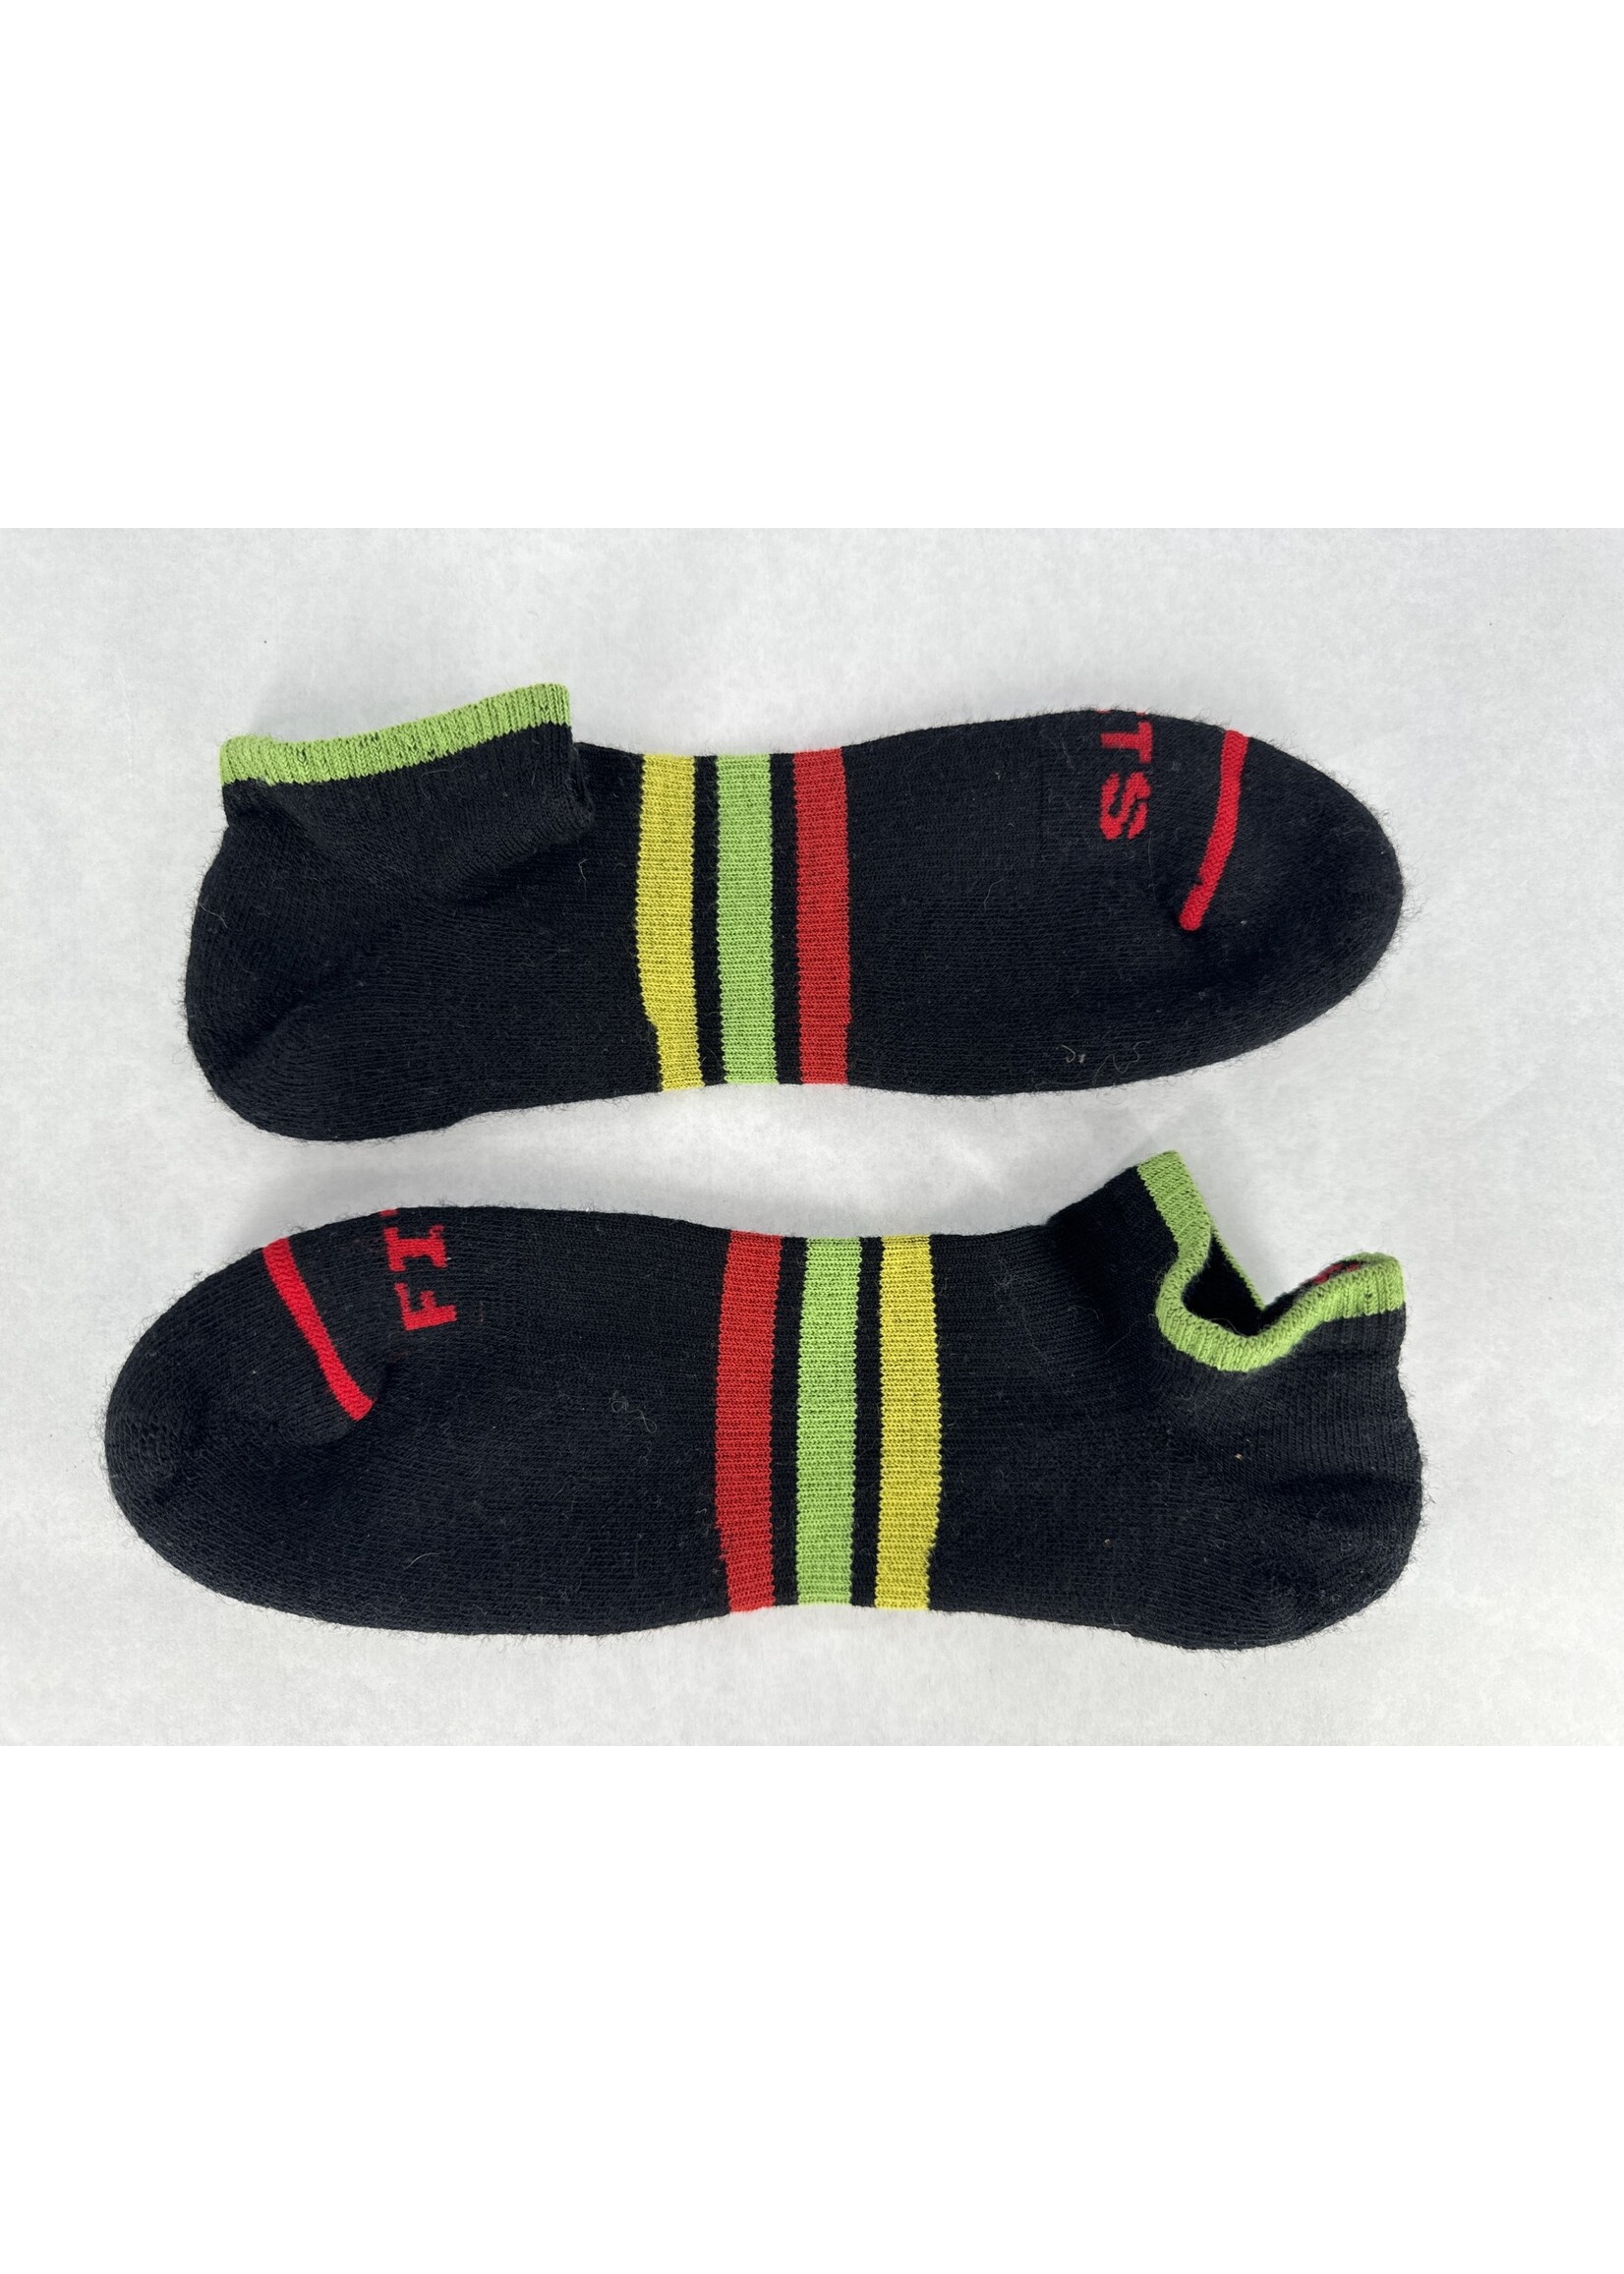 Chile Pepper Sale Socks Fits Low Runner XL